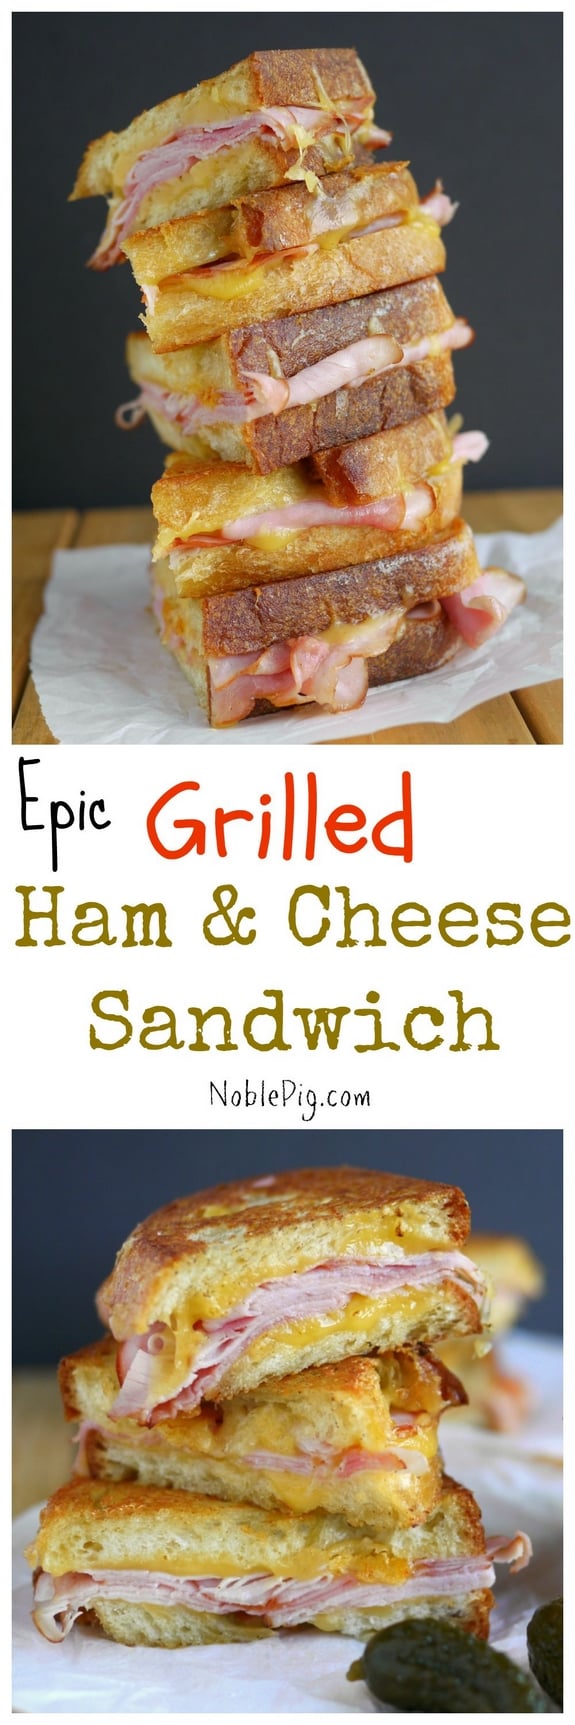 Epic Grilled Ham and Cheese Sandwich